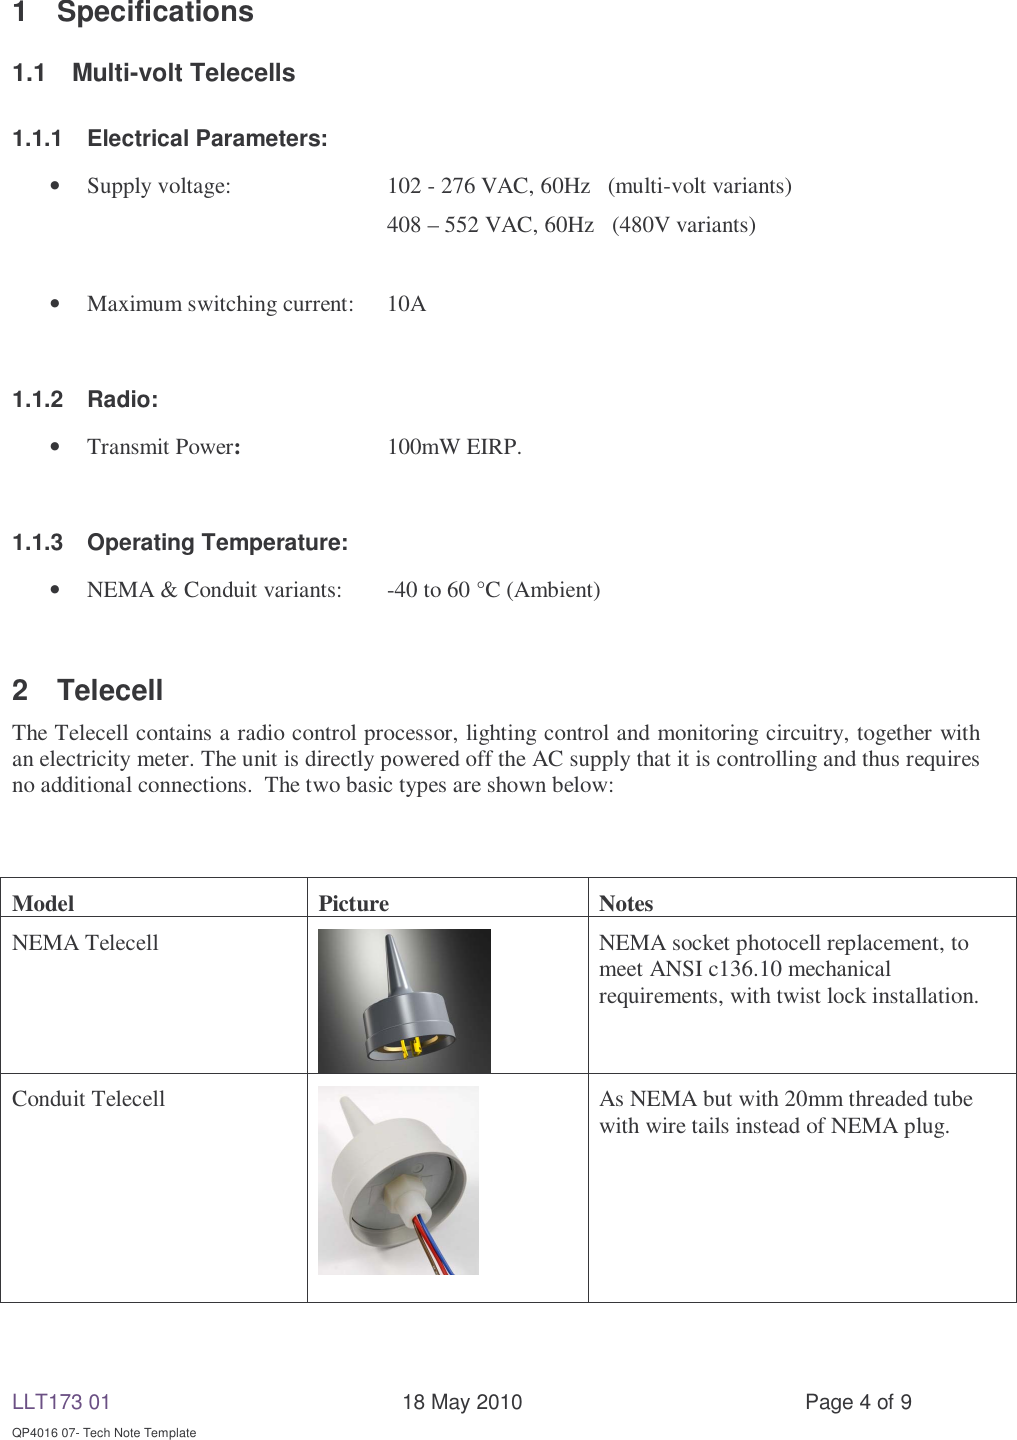 LLT173 01       18 May 2010  Page 4 of 9  QP4016 07- Tech Note Template 1 Specifications 1.1 Multi-volt Telecells 1.1.1 Electrical Parameters:     • Supply voltage:     102 - 276 VAC, 60Hz   (multi-volt variants)      408 – 552 VAC, 60Hz  (480V variants)  • Maximum switching current:  10A        1.1.2 Radio:  • Transmit Power:   100mW EIRP.  1.1.3  Operating Temperature:      • NEMA &amp; Conduit variants:  -40 to 60 °C (Ambient)  2 Telecell  The Telecell contains a radio control processor, lighting control and monitoring circuitry, together with an electricity meter. The unit is directly powered off the AC supply that it is controlling and thus requires no additional connections.  The two basic types are shown below:   Model Picture Notes NEMA Telecell  NEMA socket photocell replacement, to meet ANSI c136.10 mechanical requirements, with twist lock installation. Conduit Telecell   As NEMA but with 20mm threaded tube with wire tails instead of NEMA plug.  